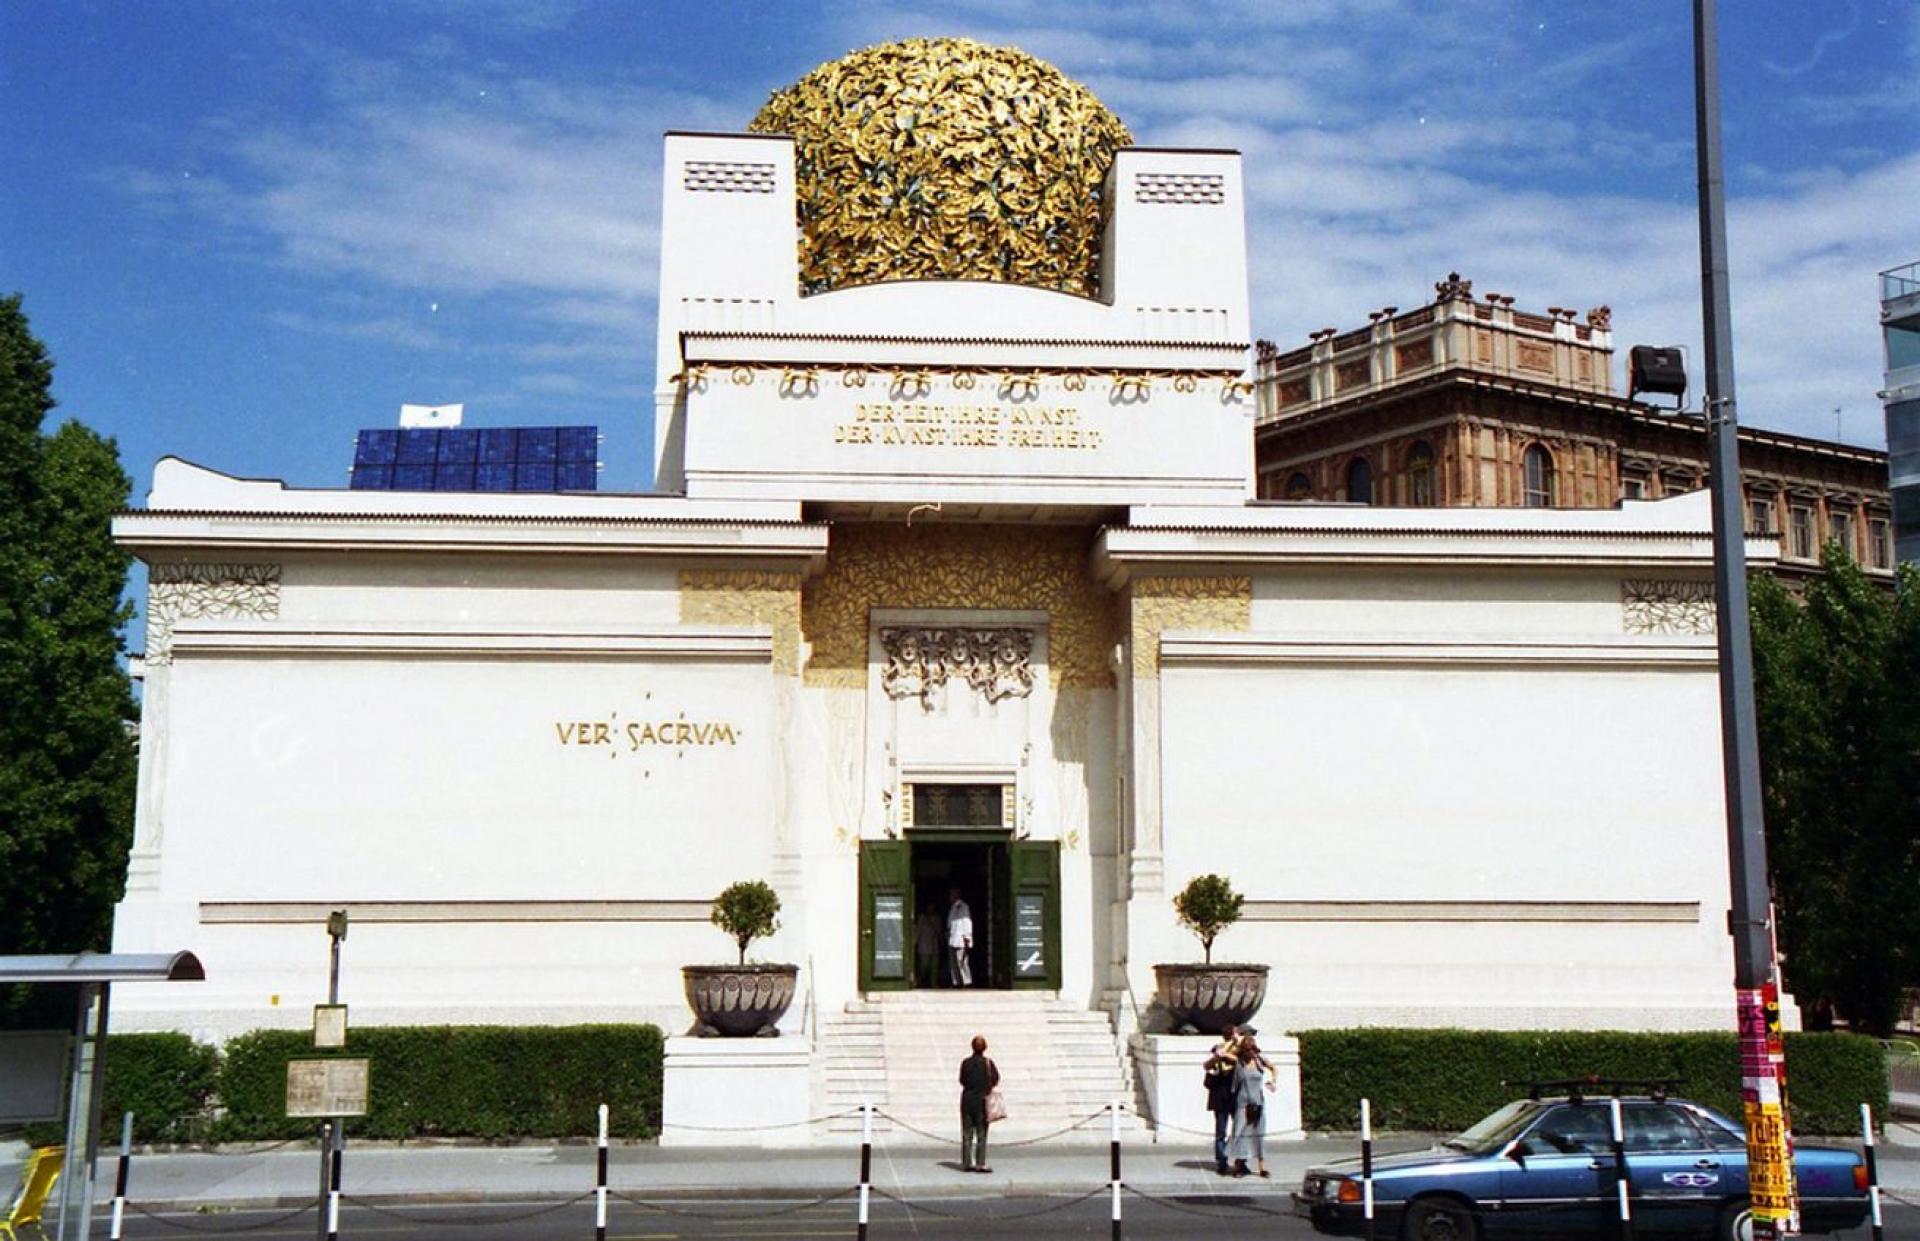 The Secession building (1897) in Vienna was designed by Joseph Maria Olbrich and was constructed as an architectural manifesto for the Vienna Secession. | via Secession